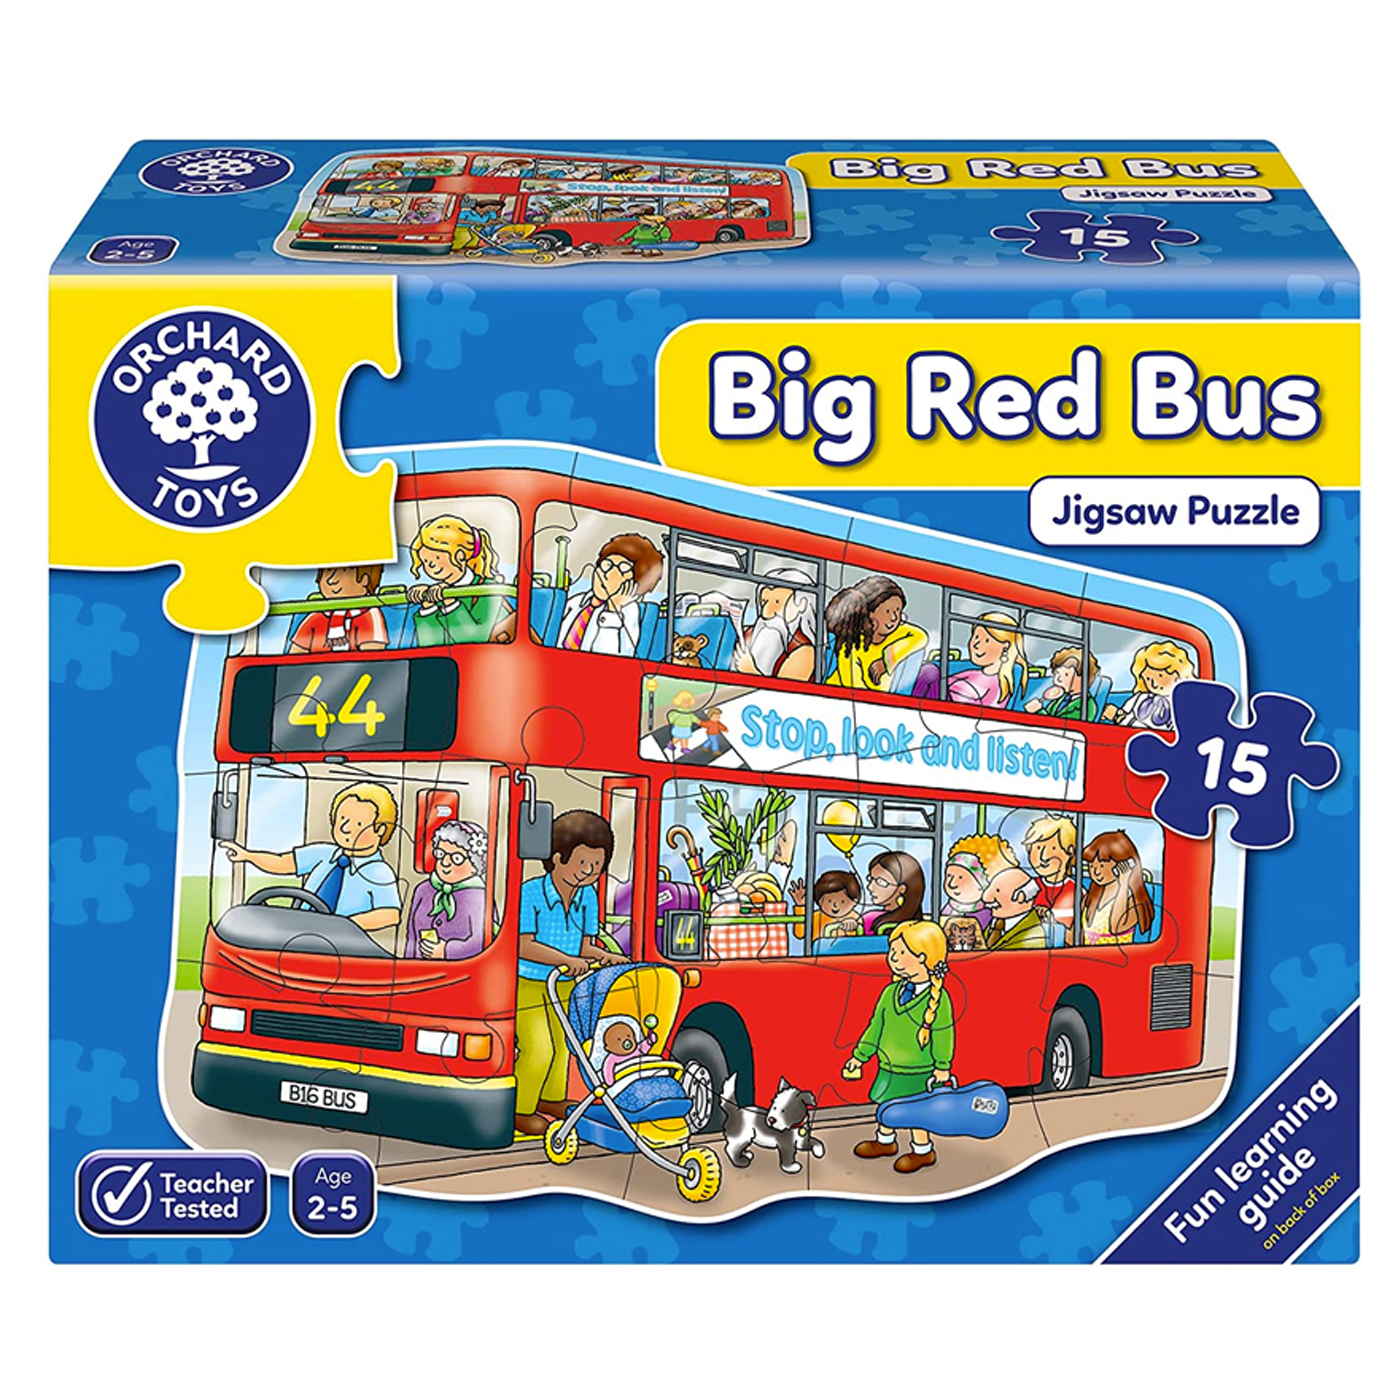 ORCHARD TOYS Orchard Toys Big Red Bus 2-5 Yaş